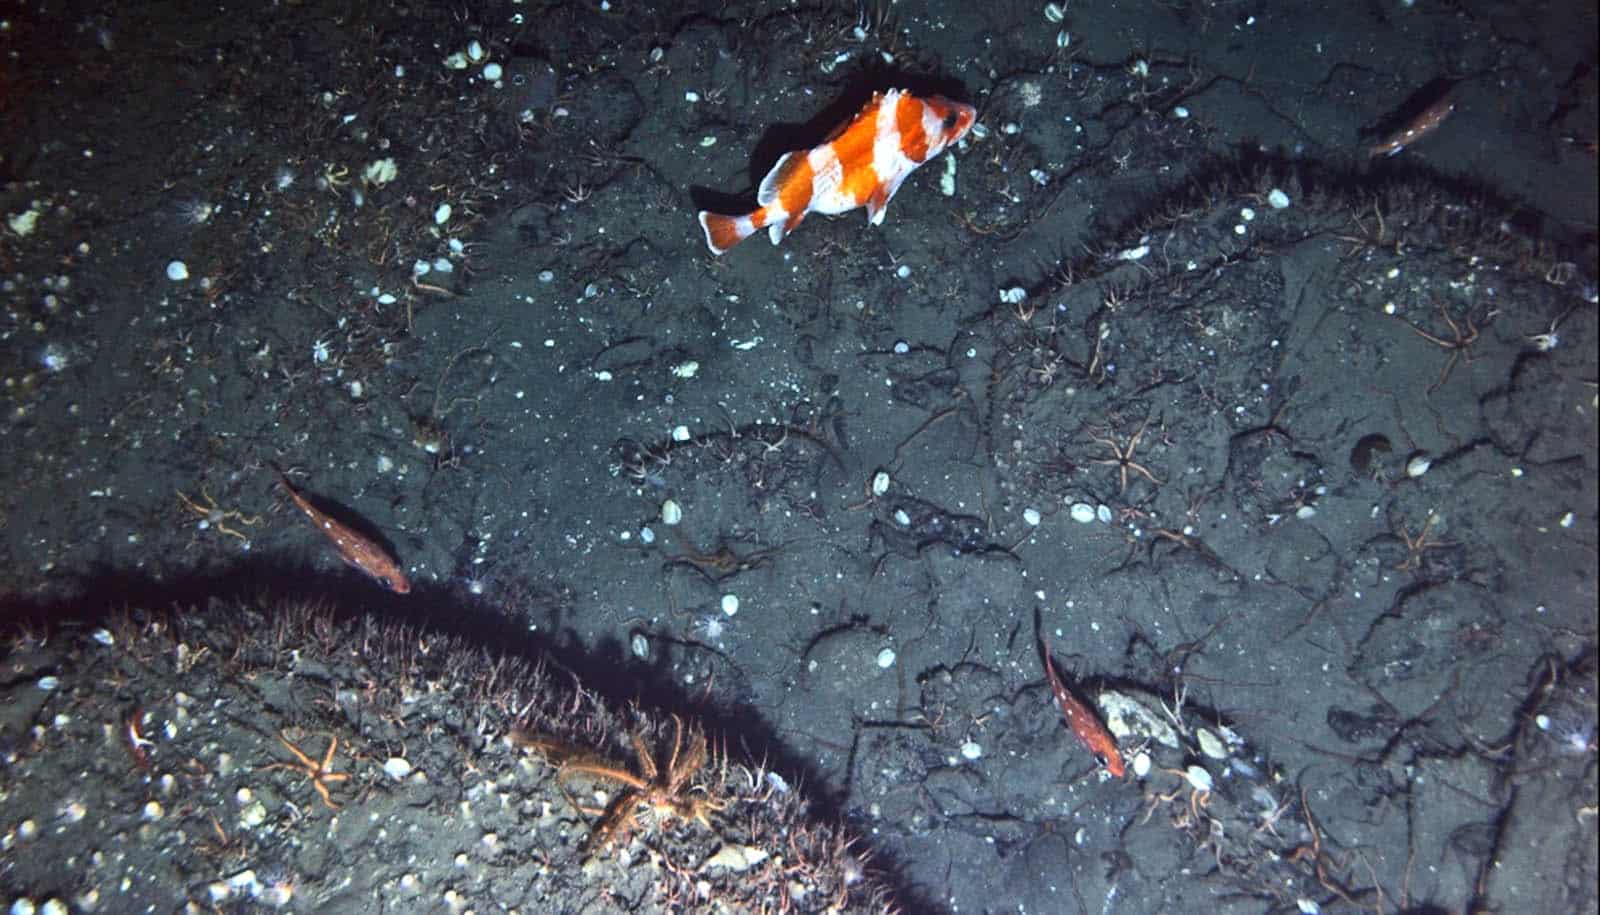 an orange and white striped fish over black surface